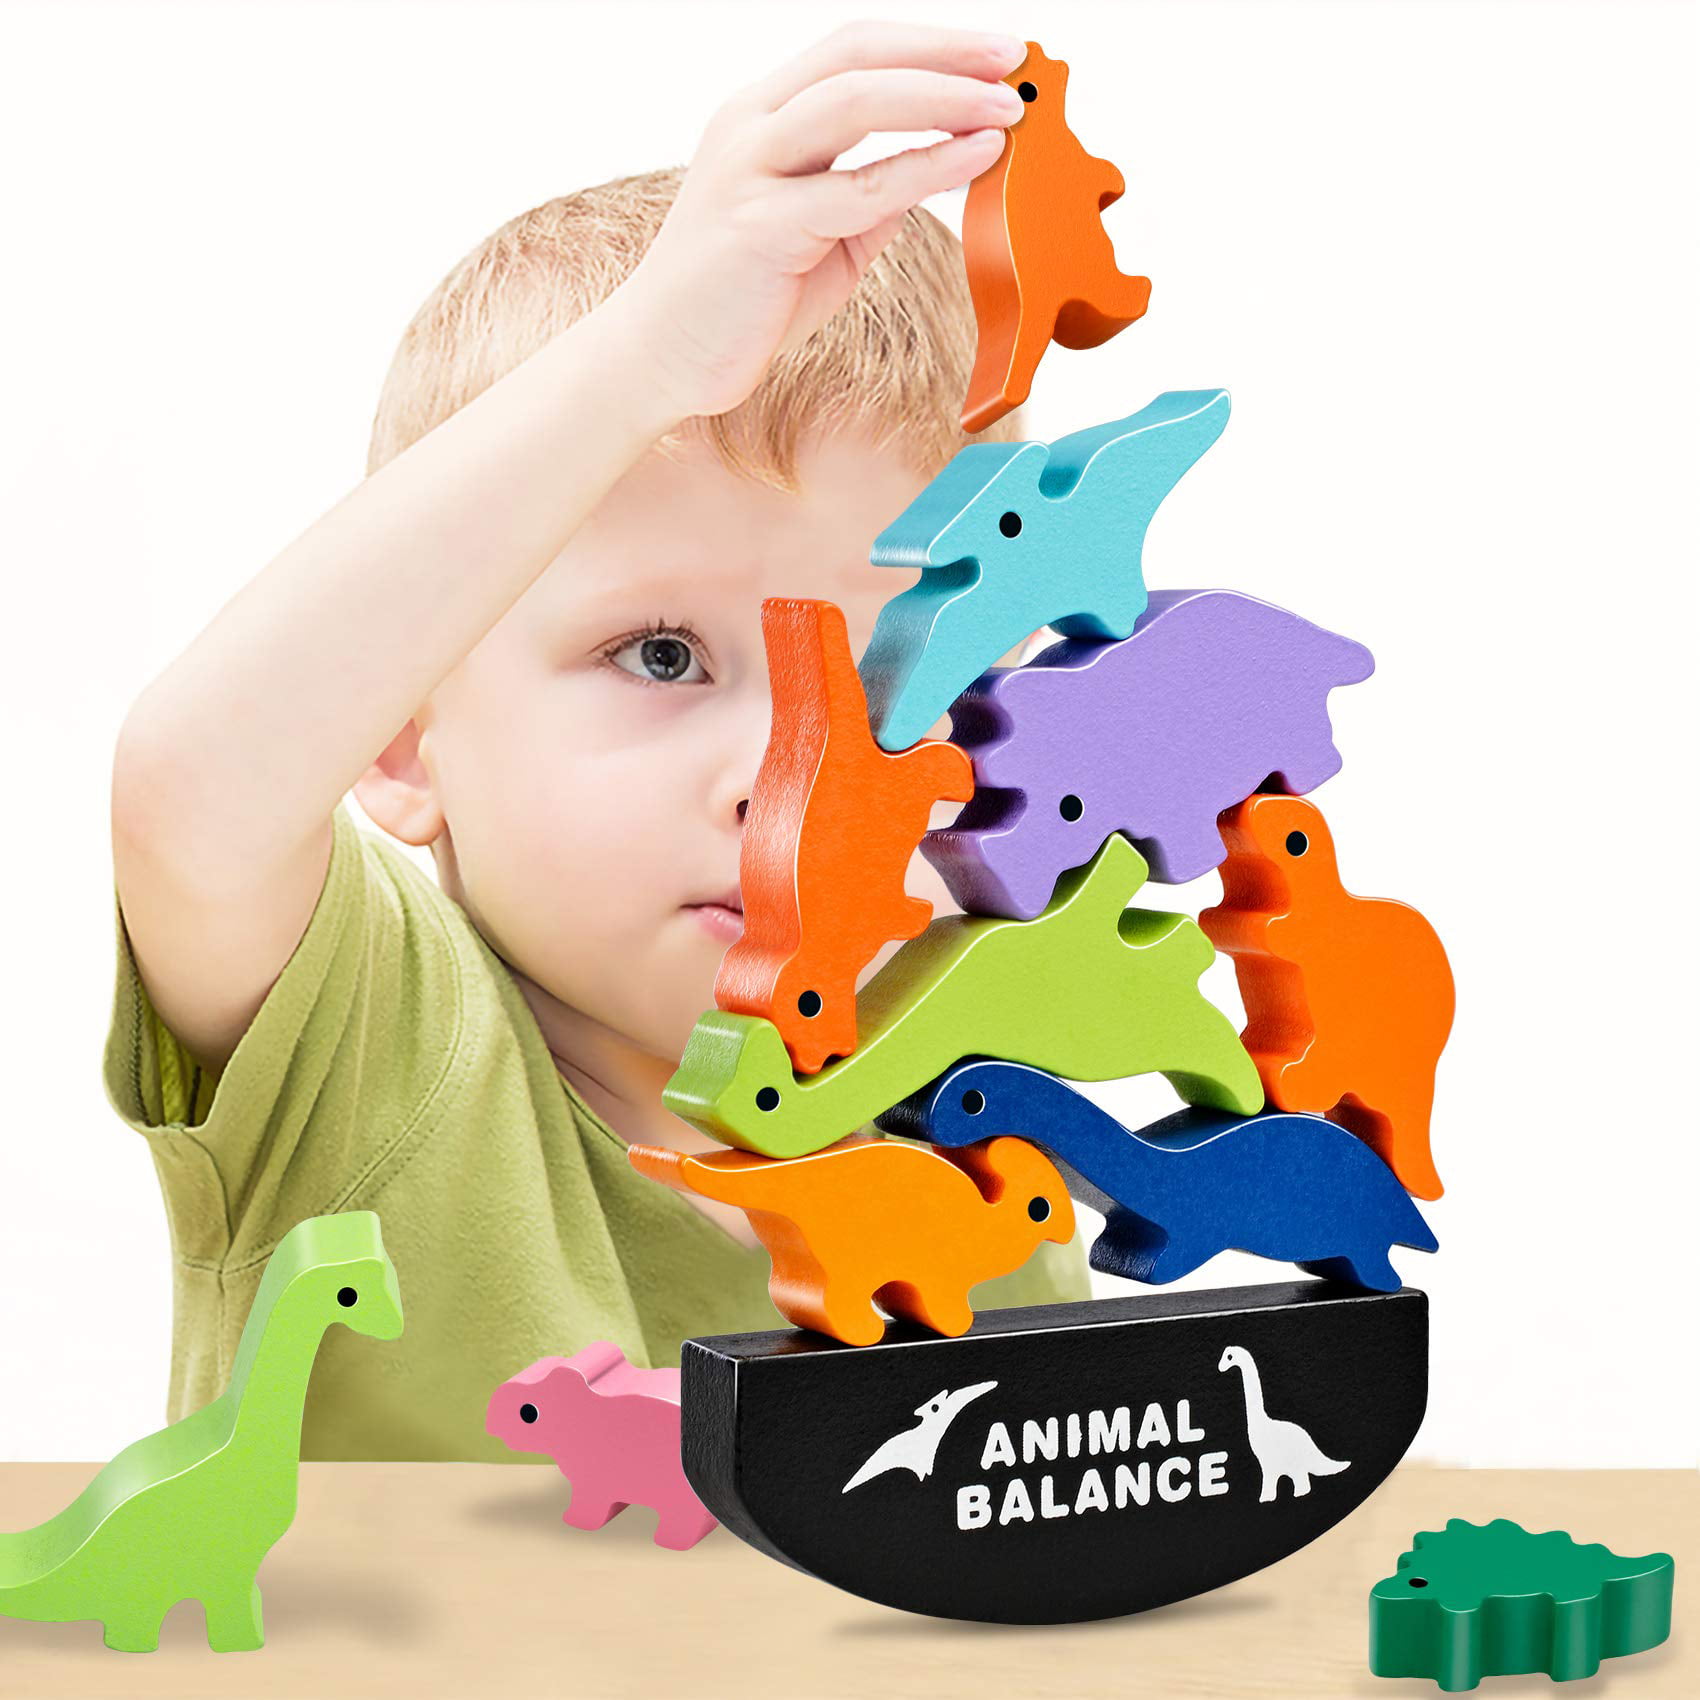 Quality Wooden Blocks for Concentration and Motor Skills Training HahaGift Cute Dinosaur Stacking Toys for Kids Best Holidays & Birthday Gift for Toddlers 